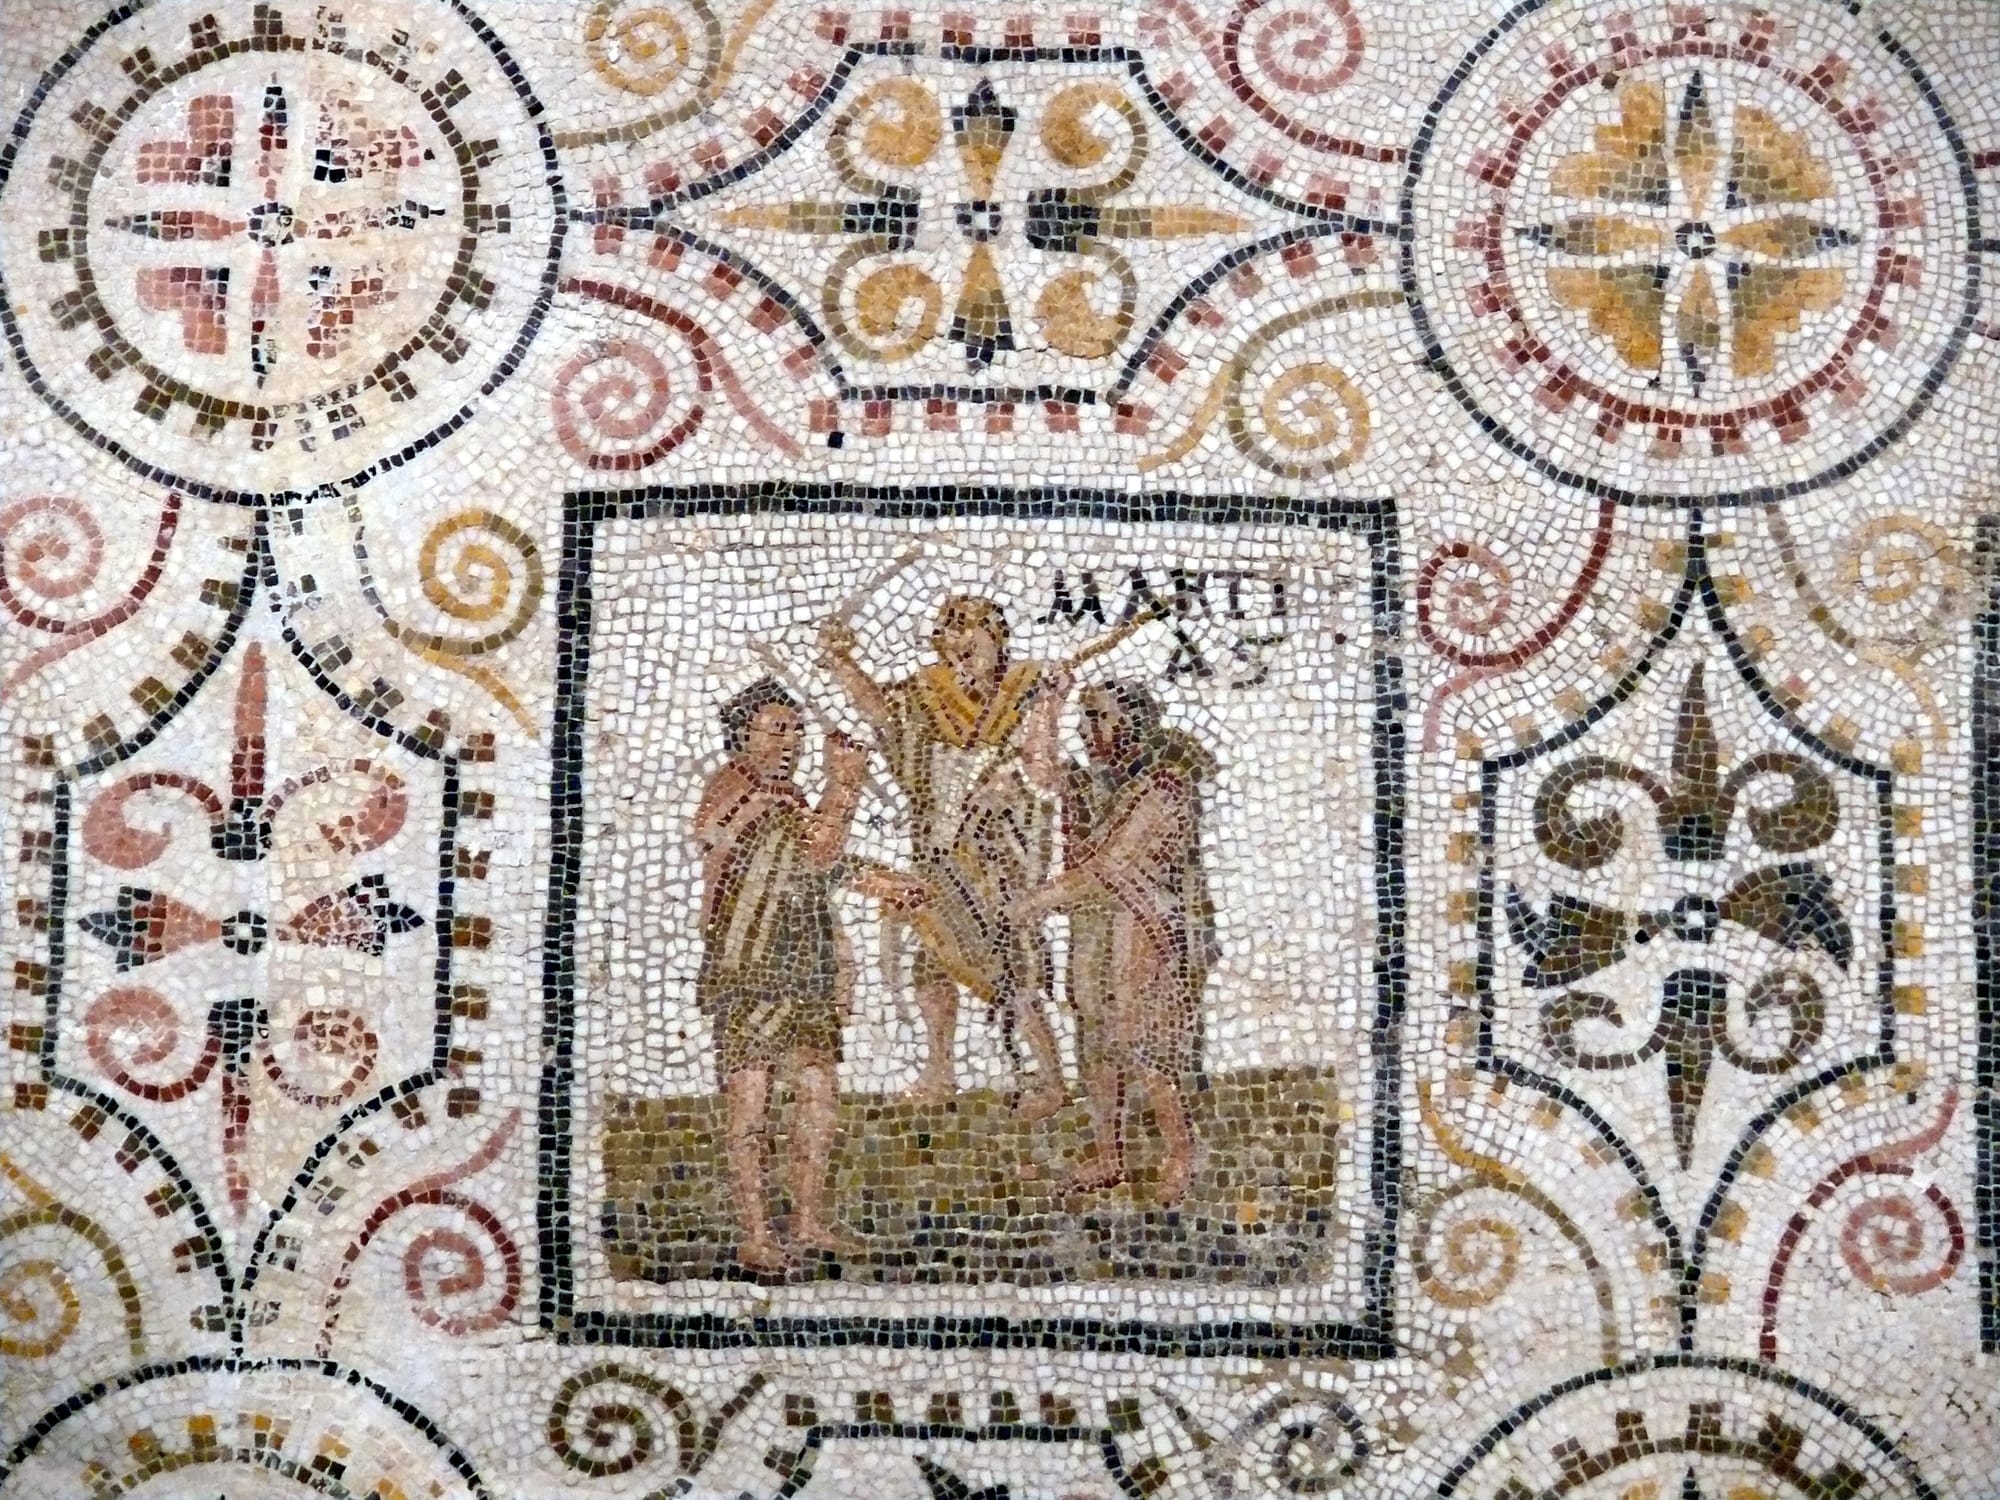 Mosaic with the months of the year